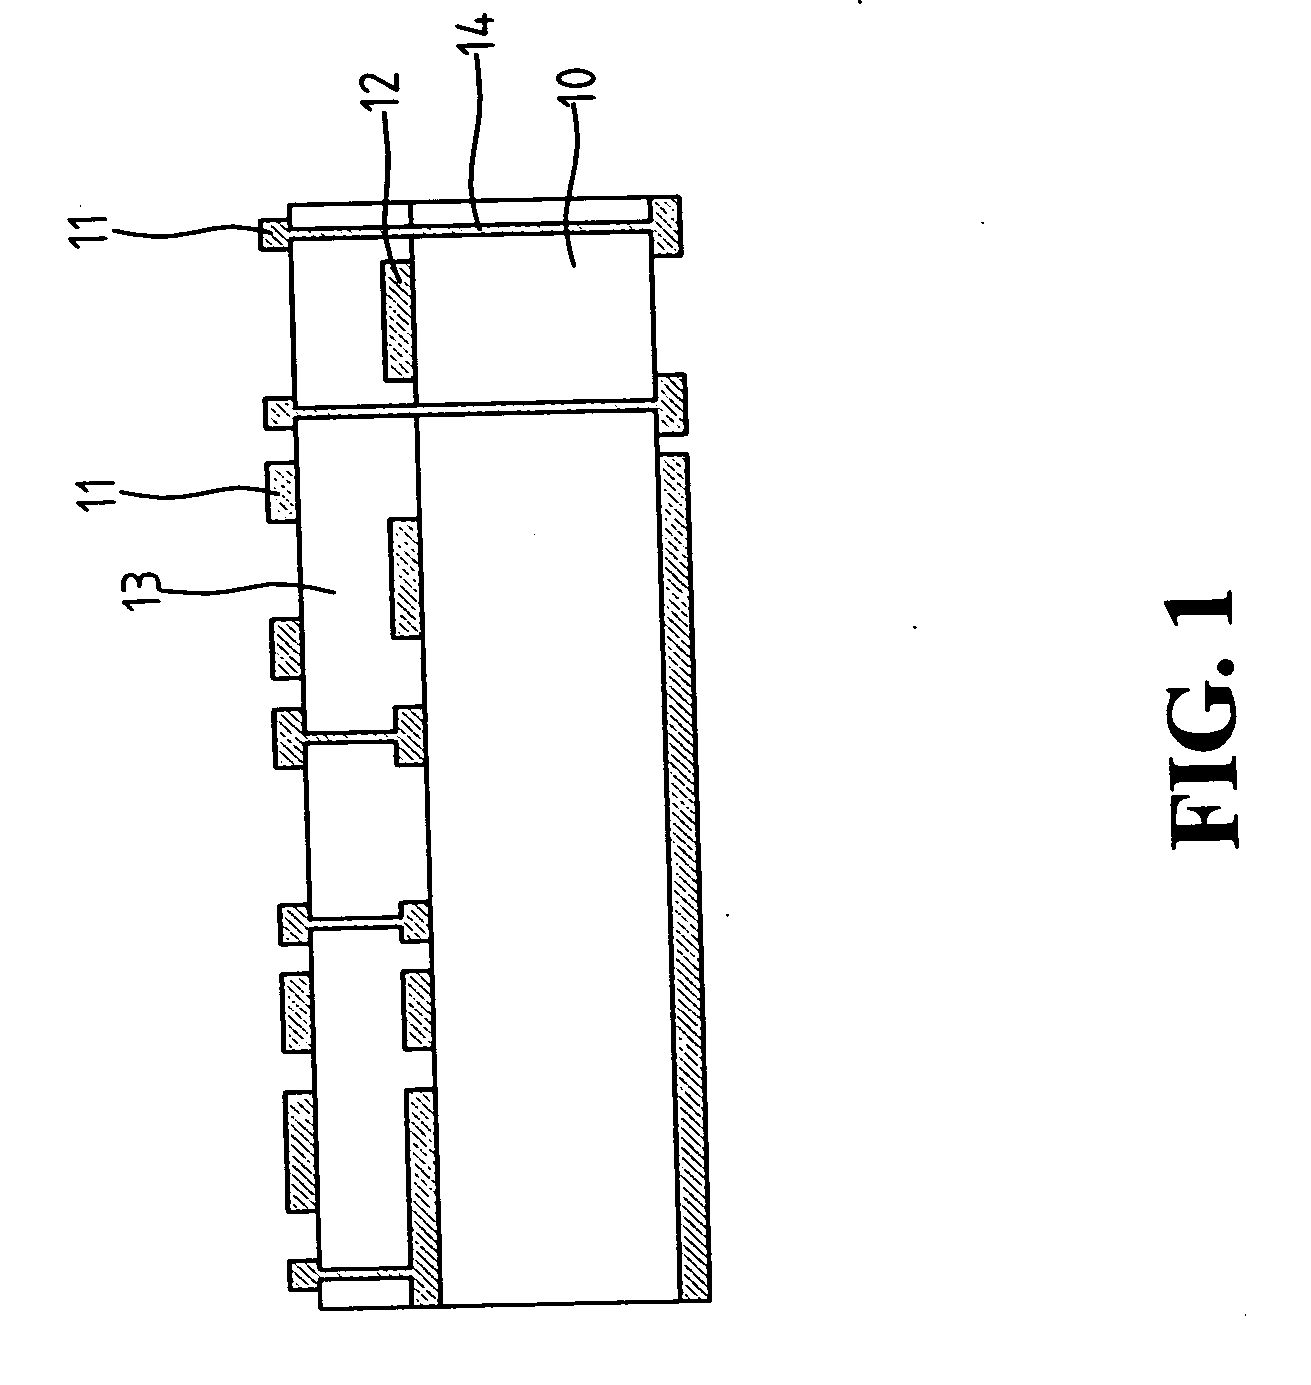 Structure of embedded capacitors and fabrication method thereof